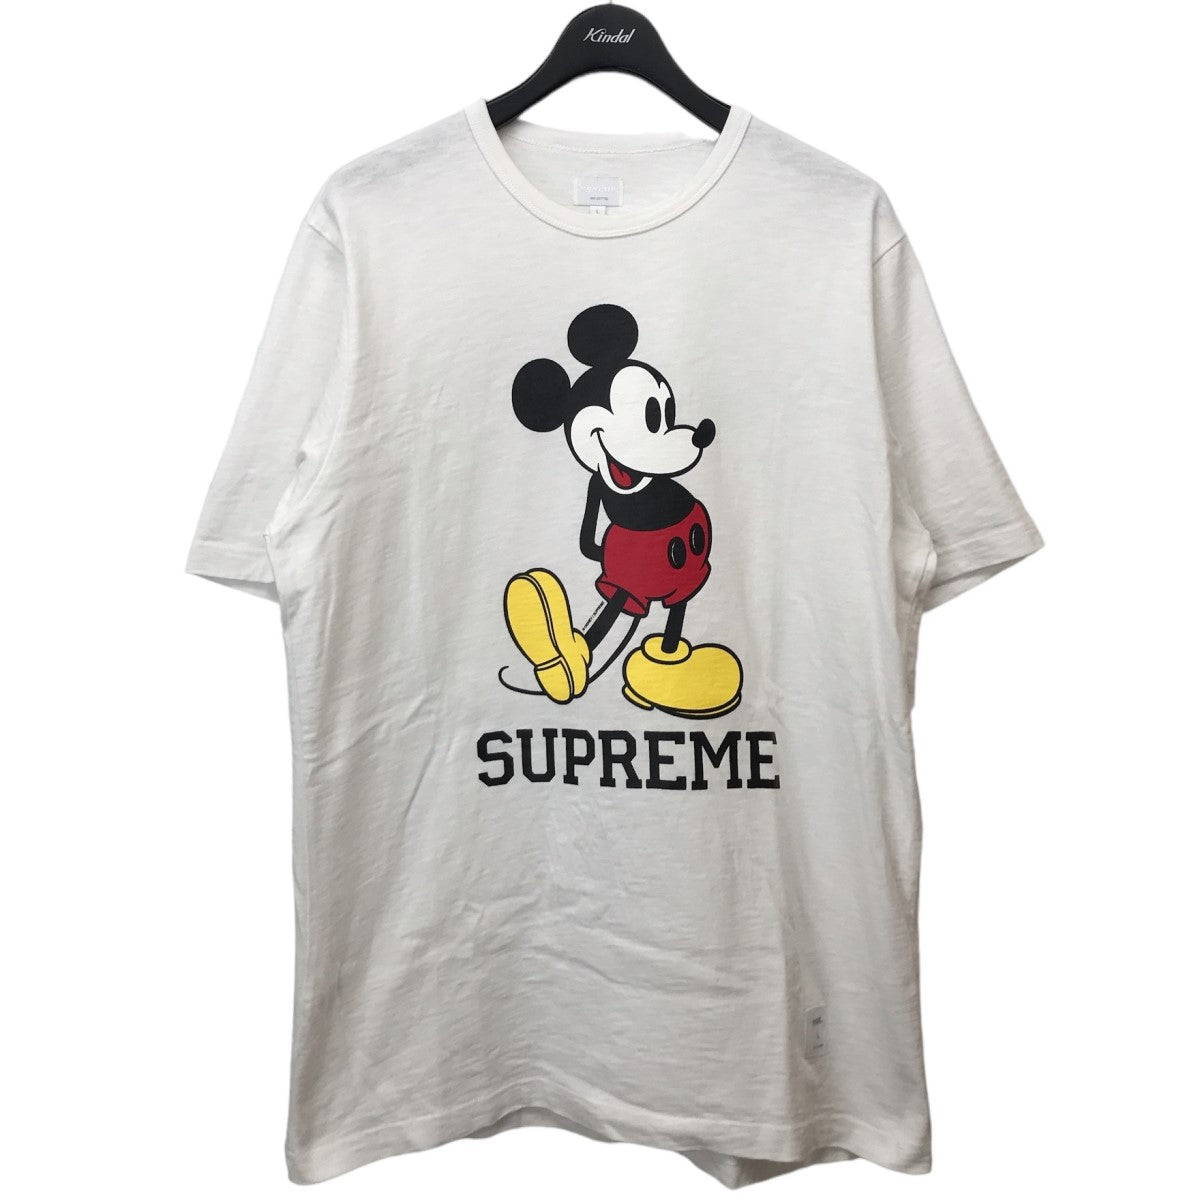 Supreme×DISNEY 09AW「Mickey Mouse Tee」ミッキーマウスTシャツ 